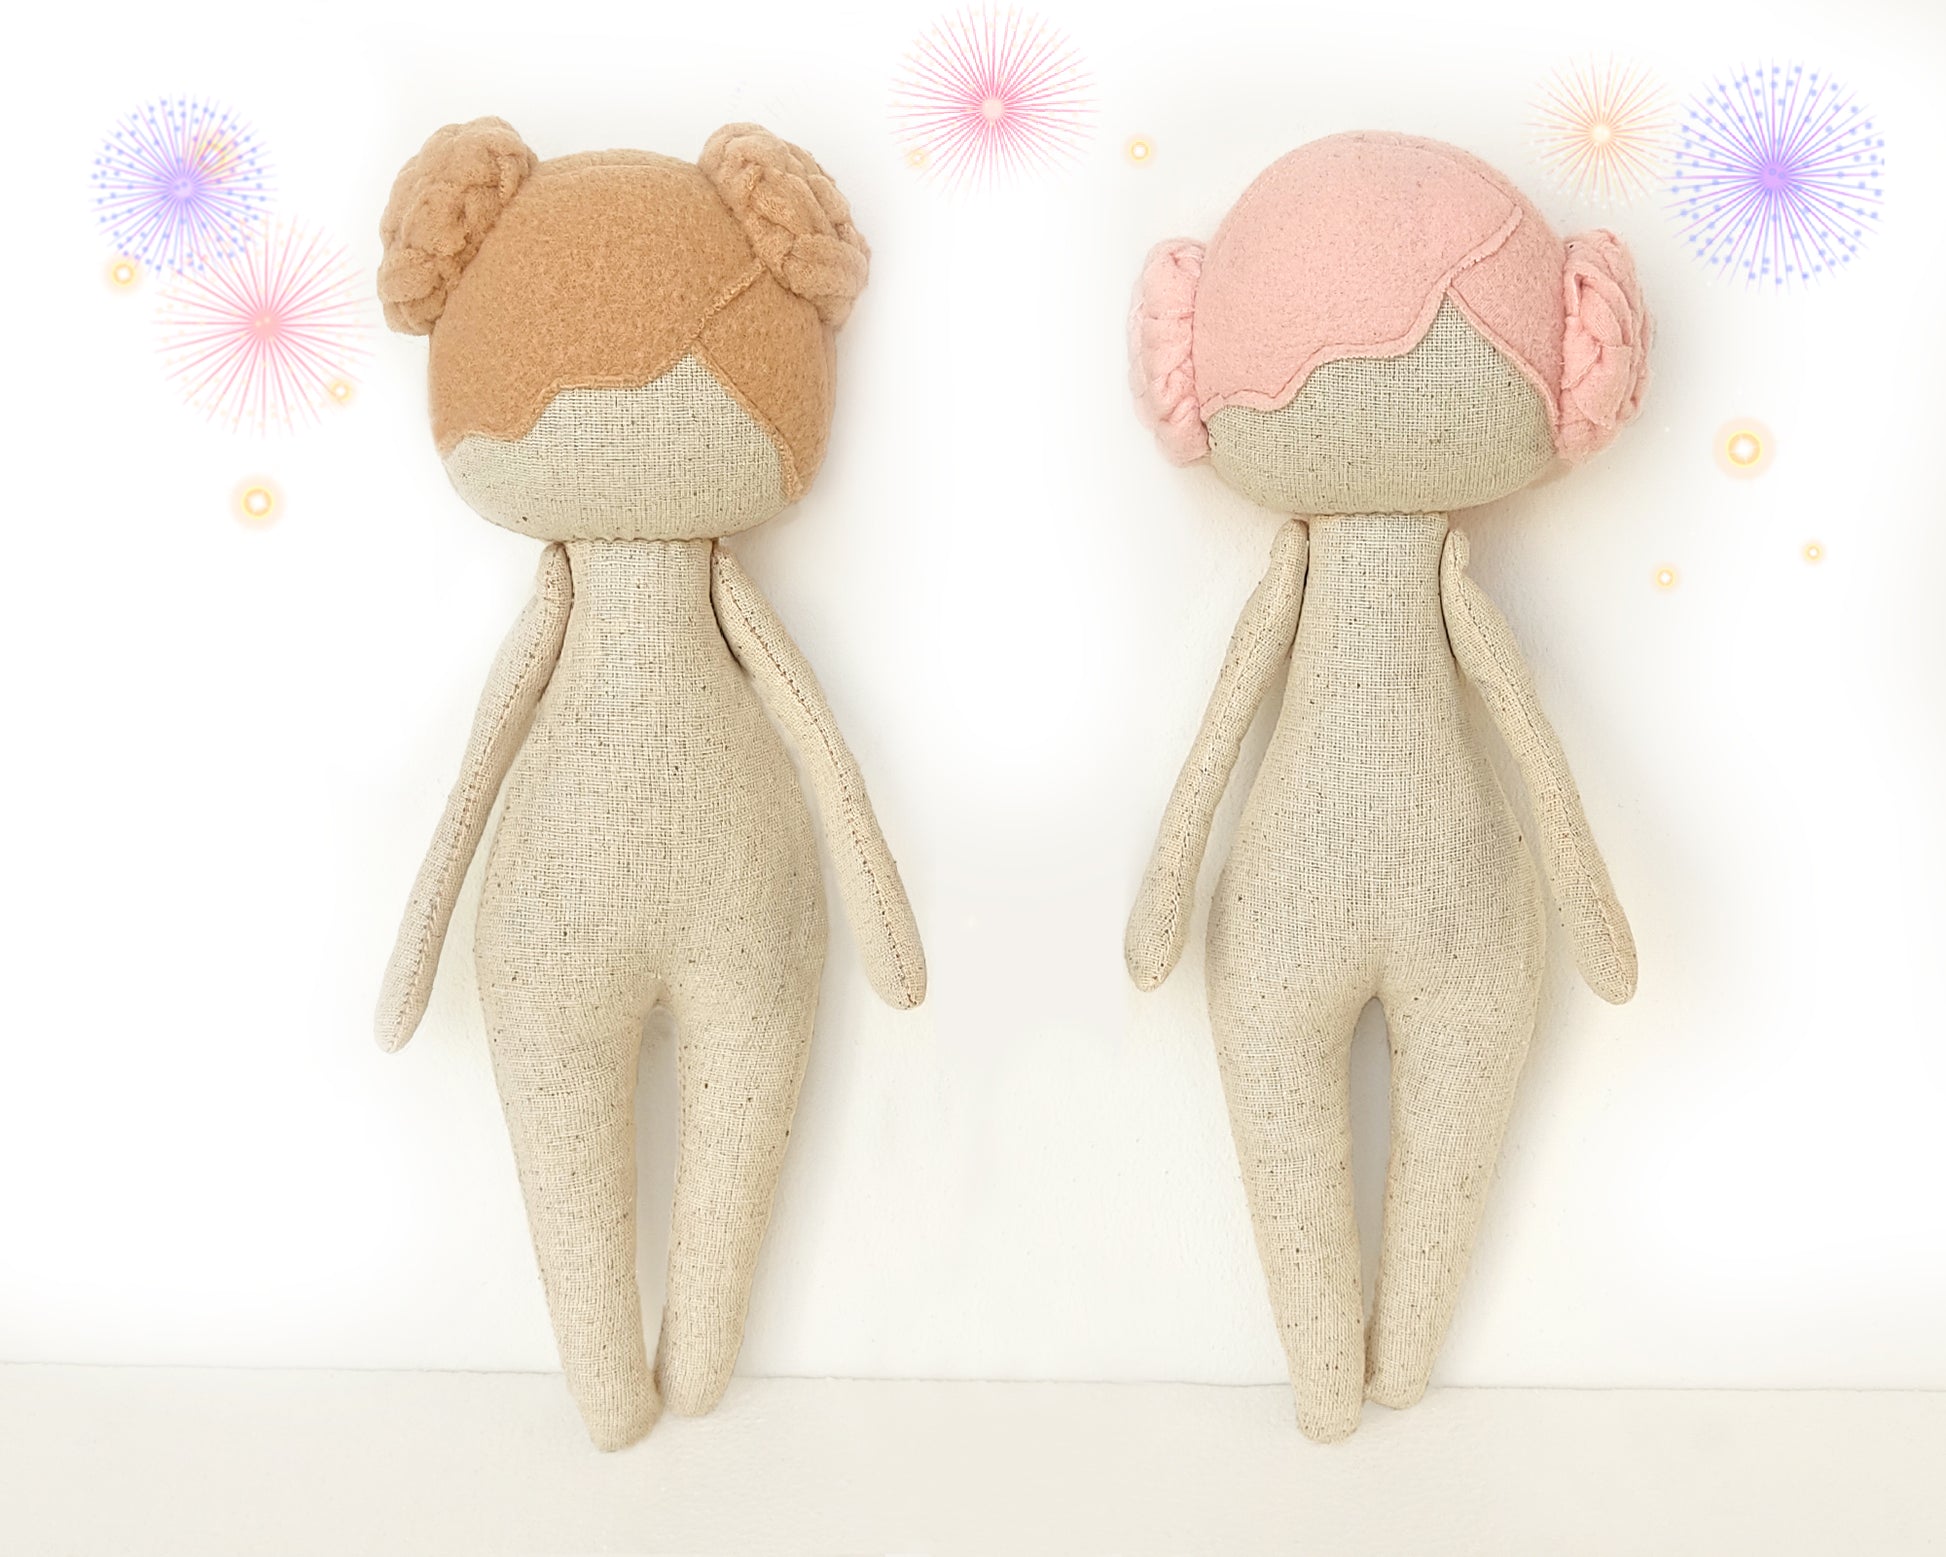 Doll Body 10 inch with hair - PDF sewing pattern and tutorial